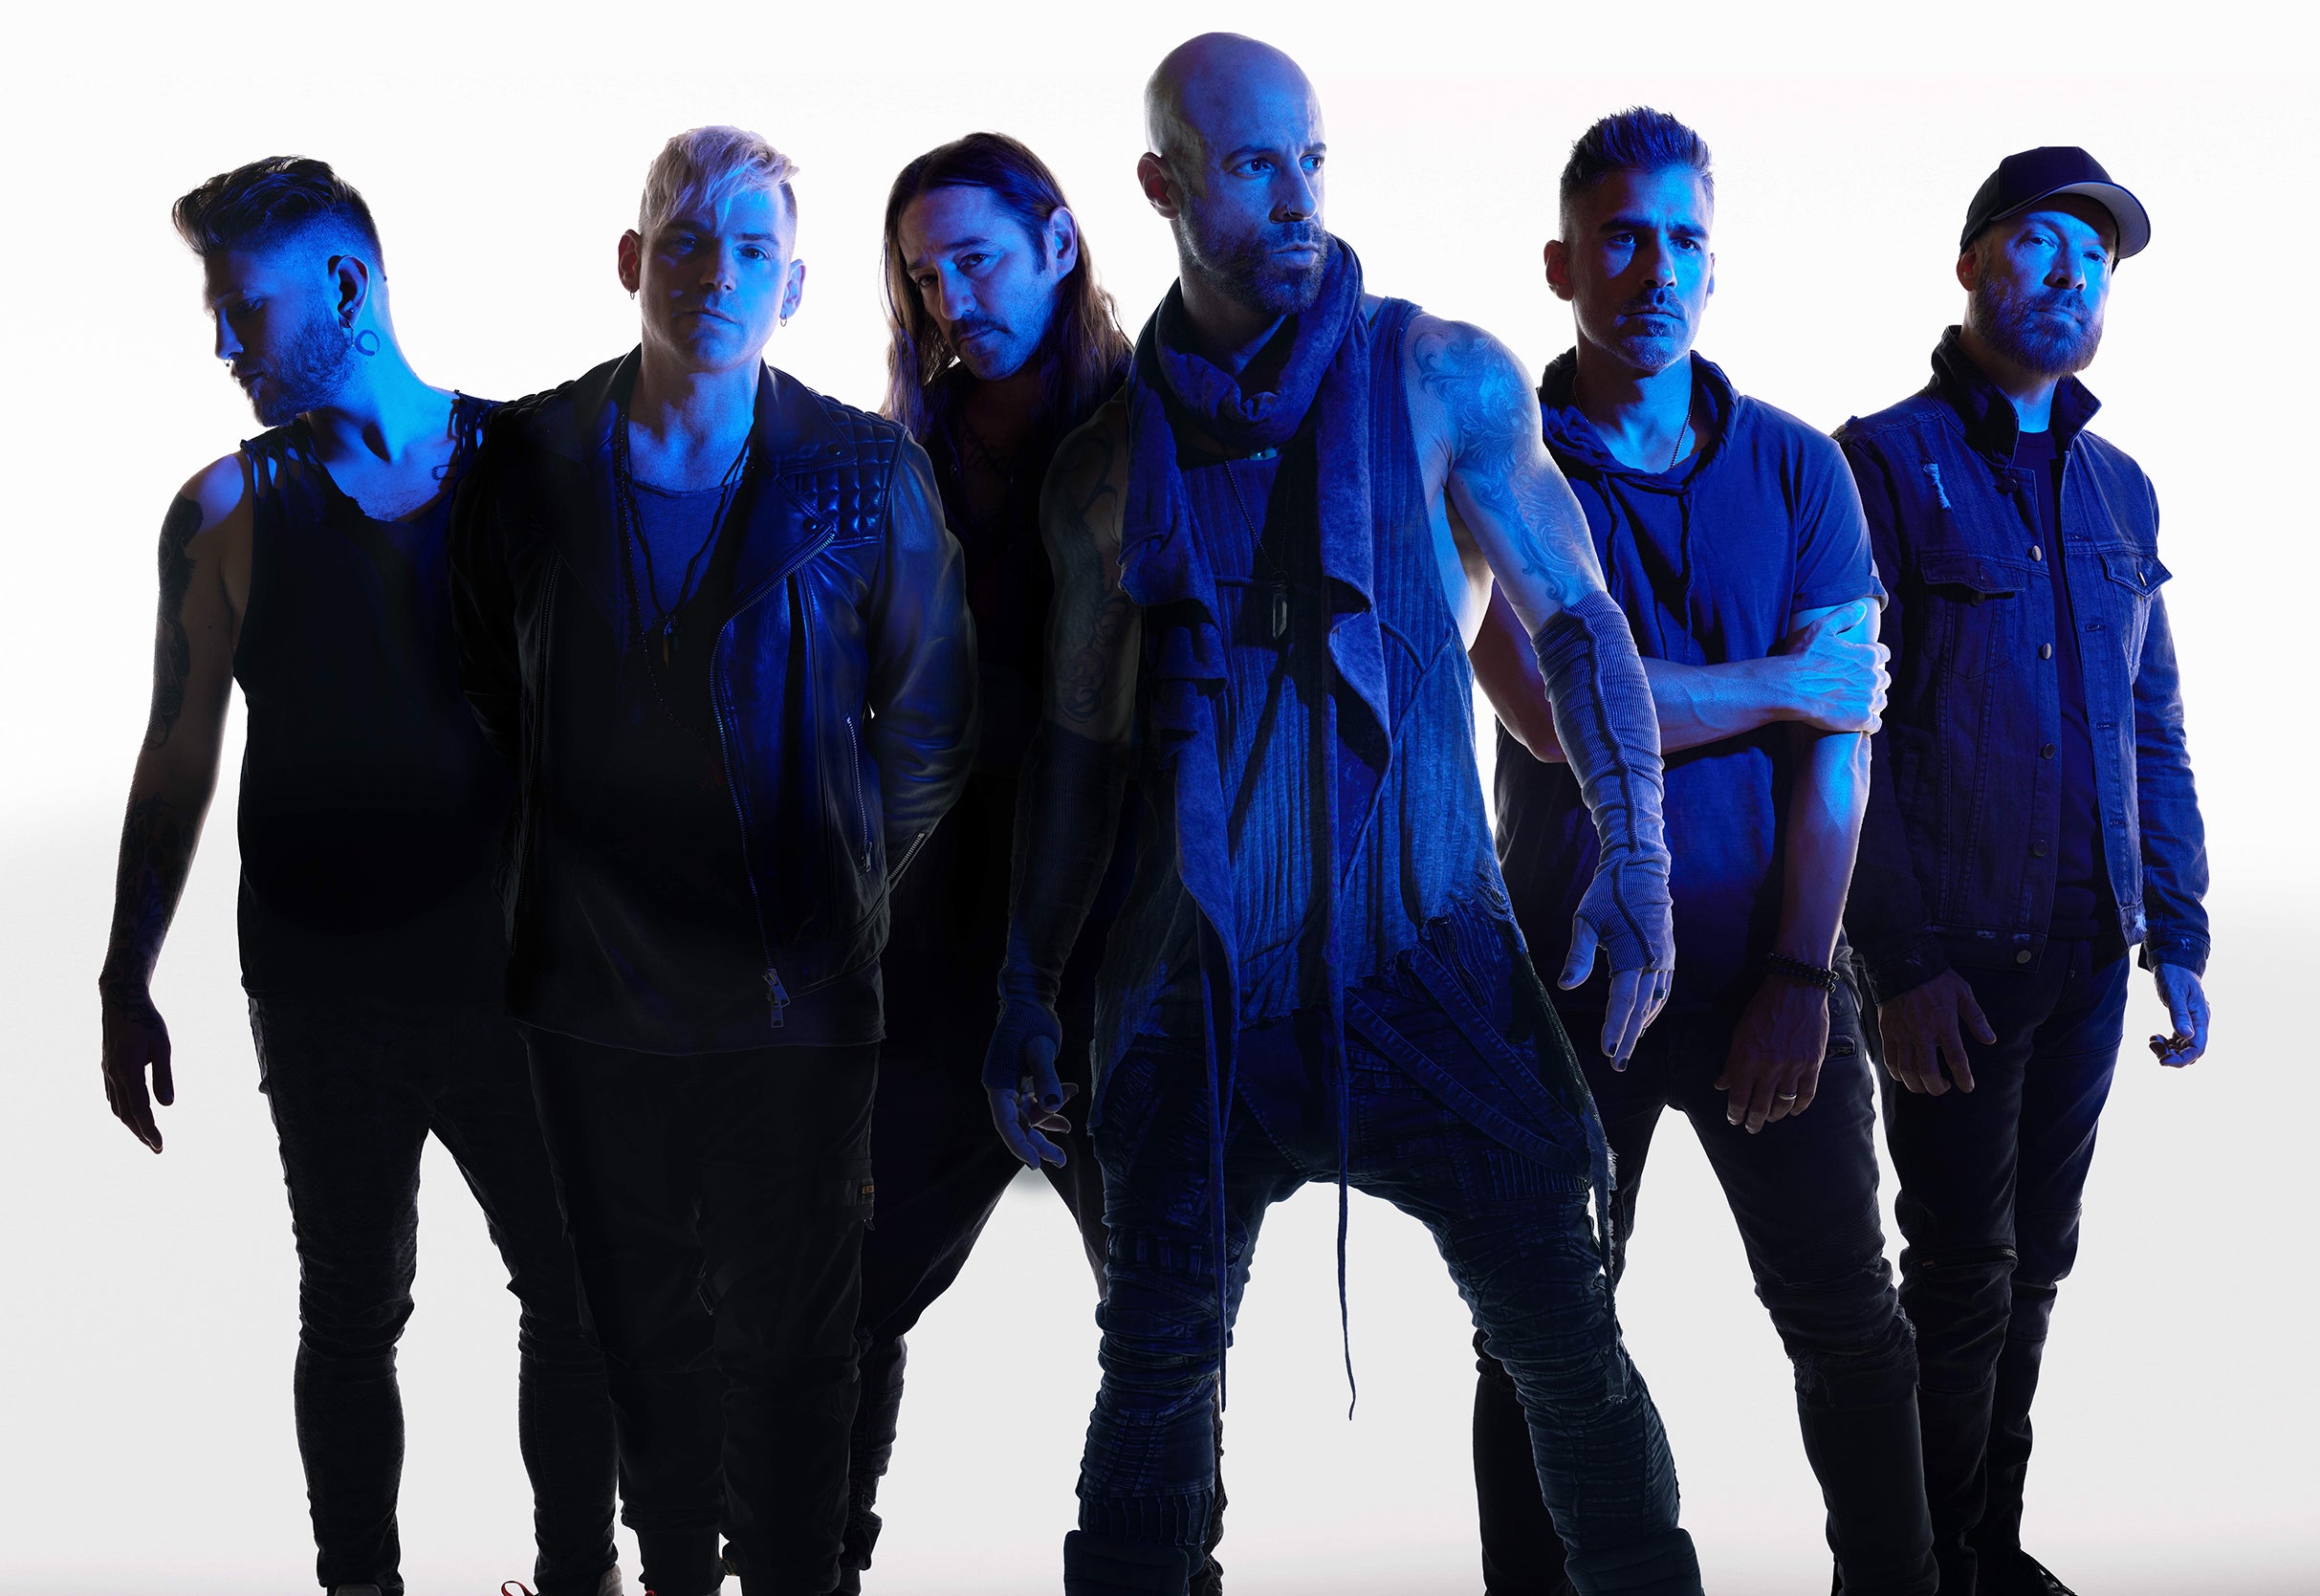 Daughtry with Scott Stapp: The Voice Of Creed in Lincoln promo photo for VIP Package presale offer code